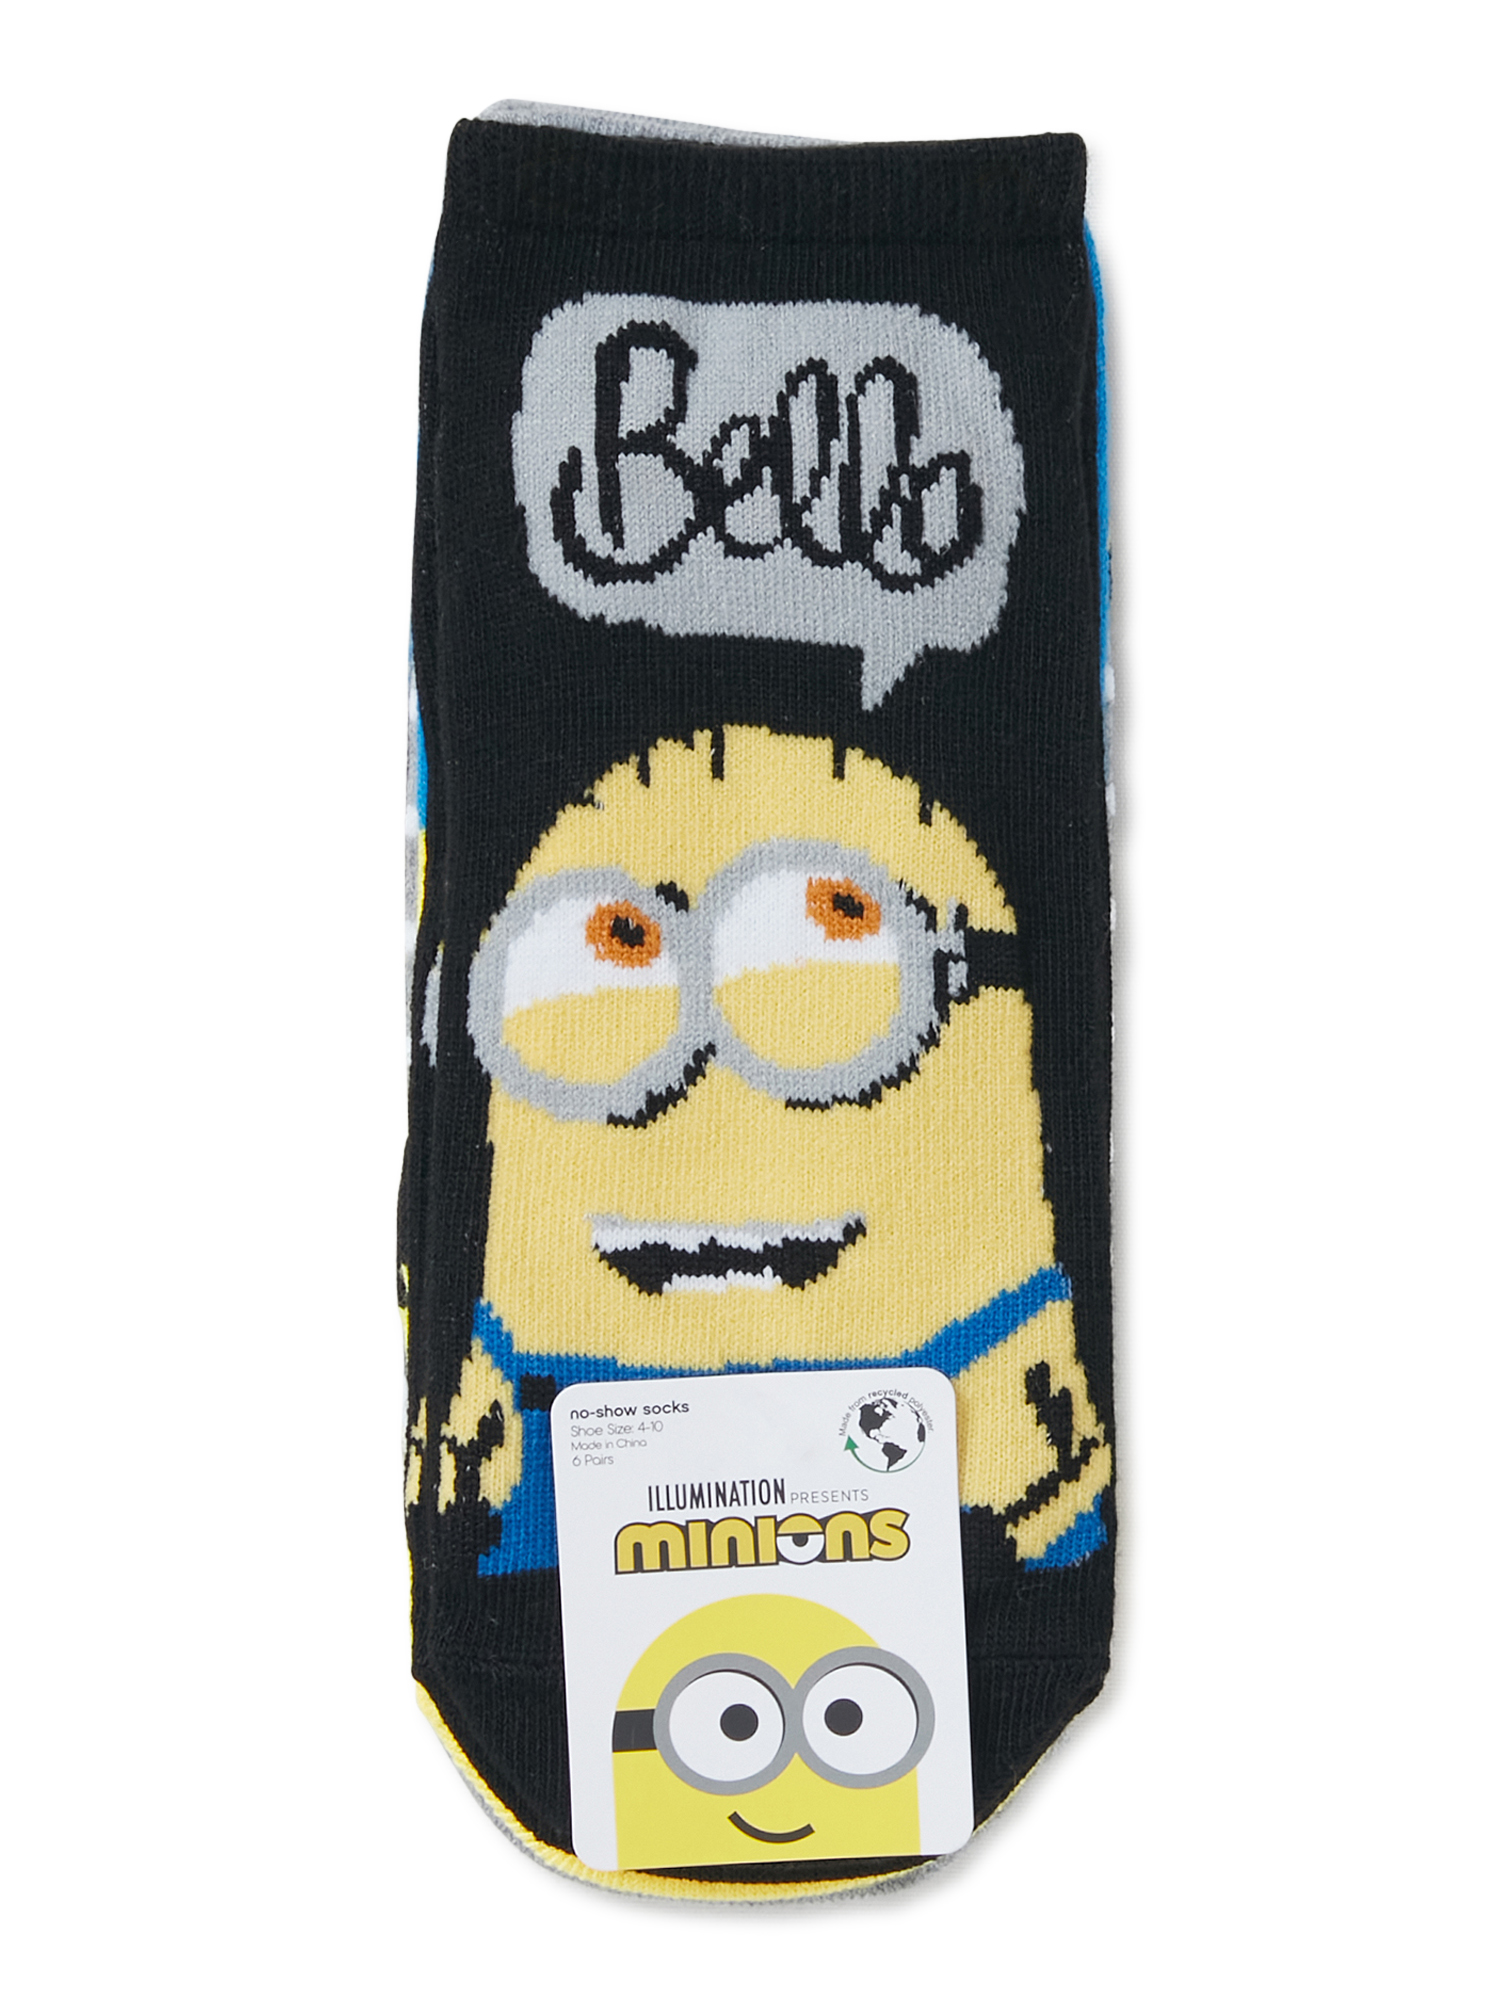 Minions Women's No Show Socks, 6-Pack - image 2 of 2